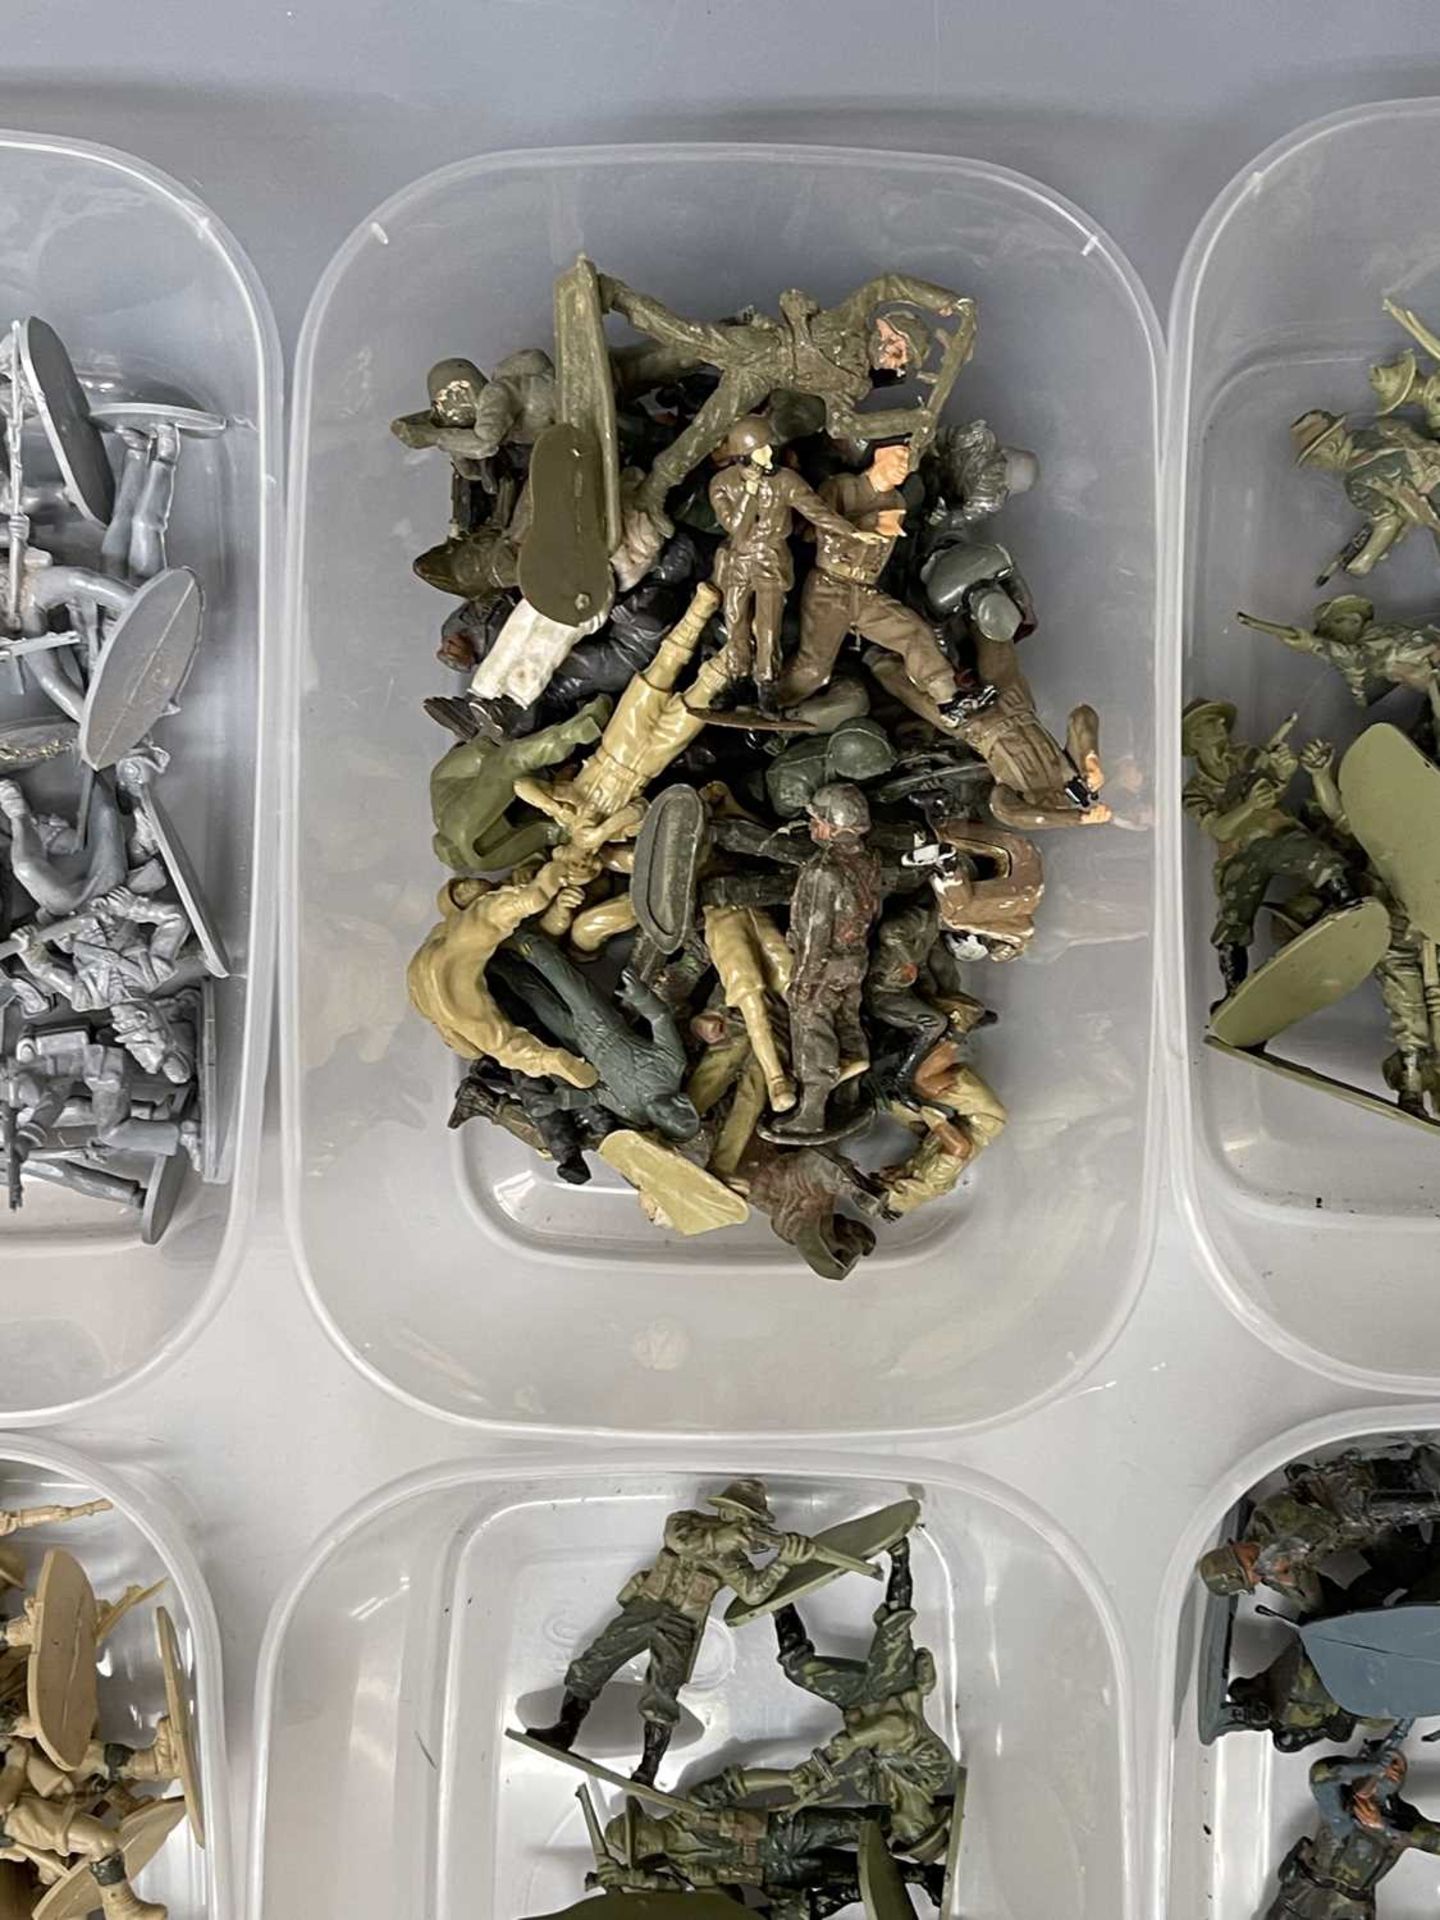 1960s-1980s Plastic Soldiers. Large quantity of mostly Airfix figures sorted into containers - WWII, - Image 10 of 12